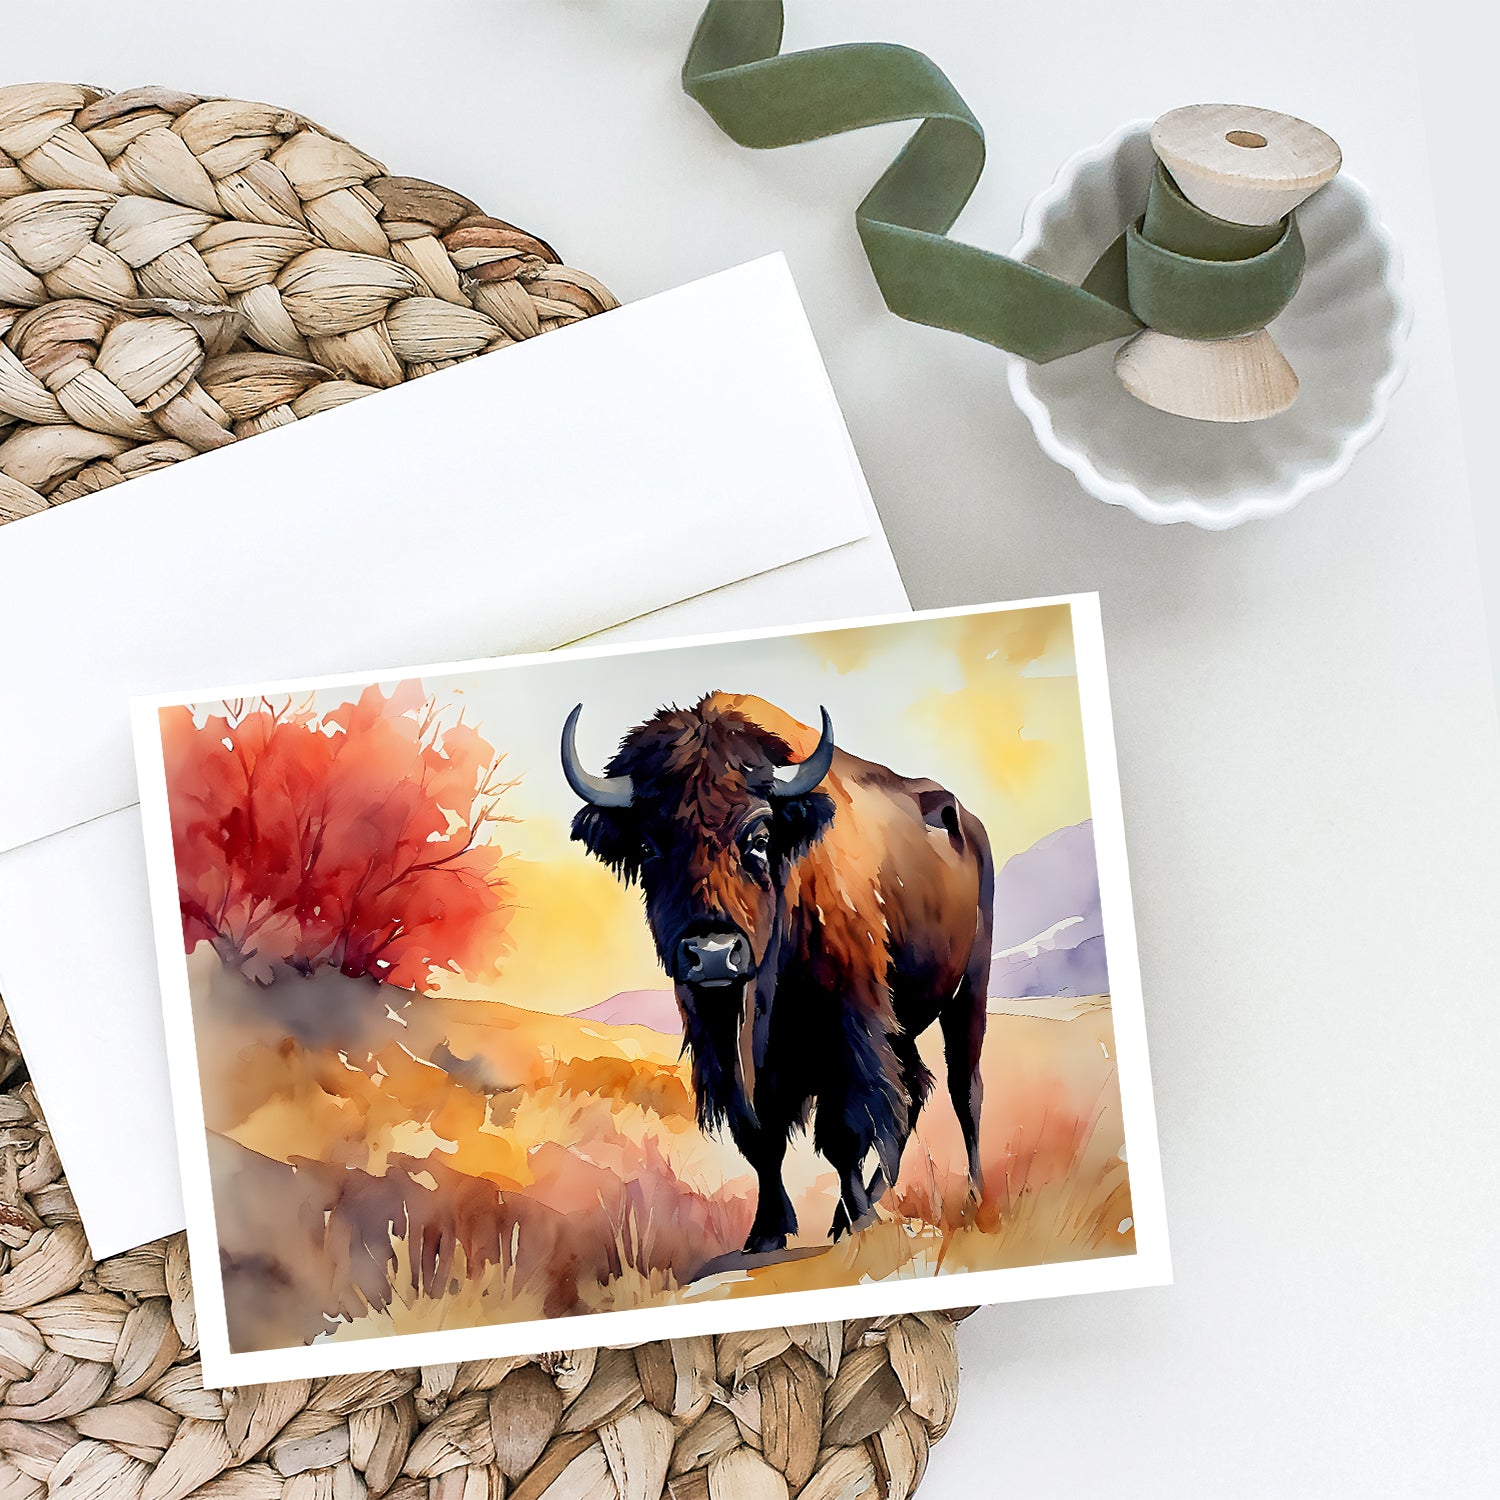 American Bison Greeting Cards Pack of 8